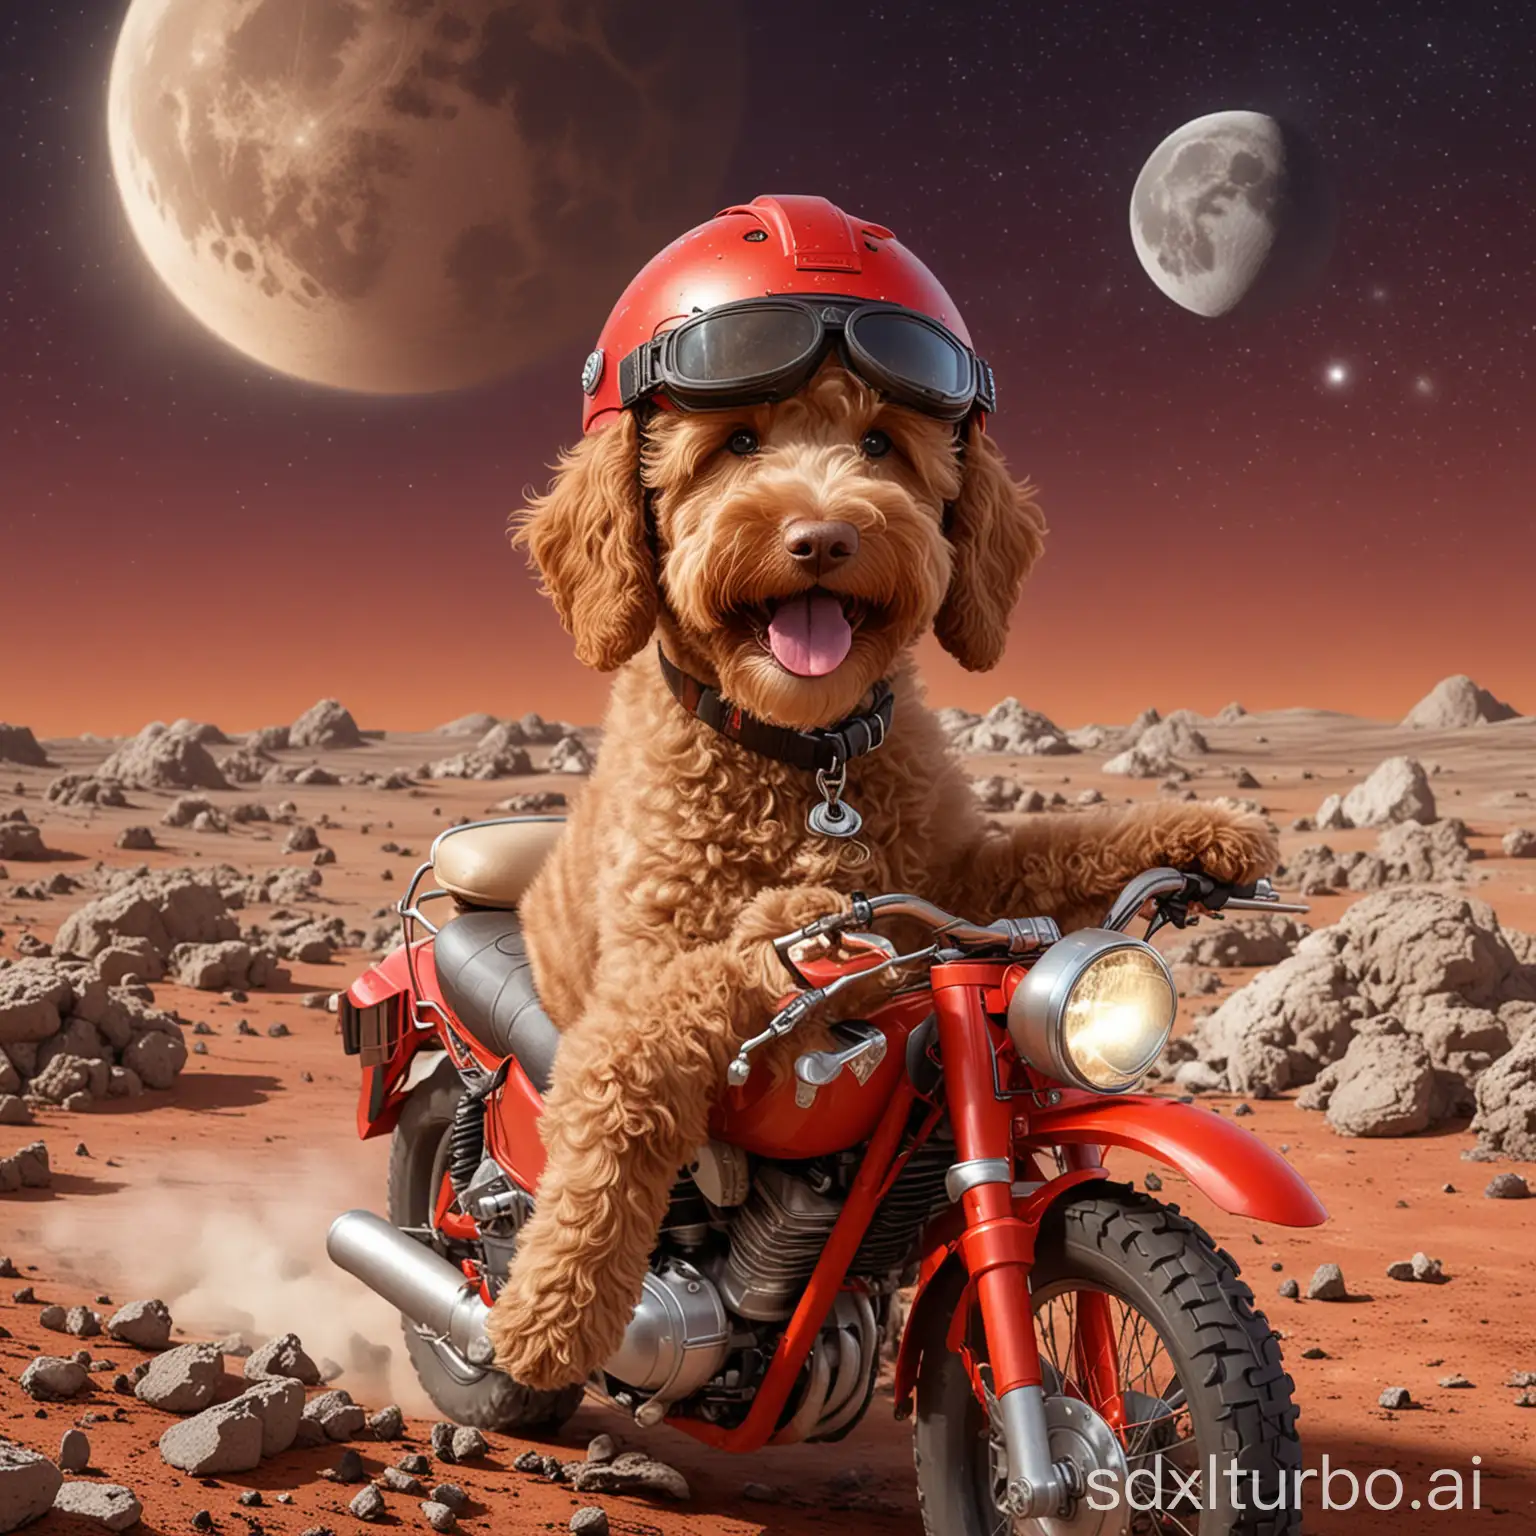 Cartoon, a cheerful light brown labradoodle wearing a helmet and goggles, riding a red motorcycle on the moon's surface with earth hanging in the background, vibrant, happy, adventurous